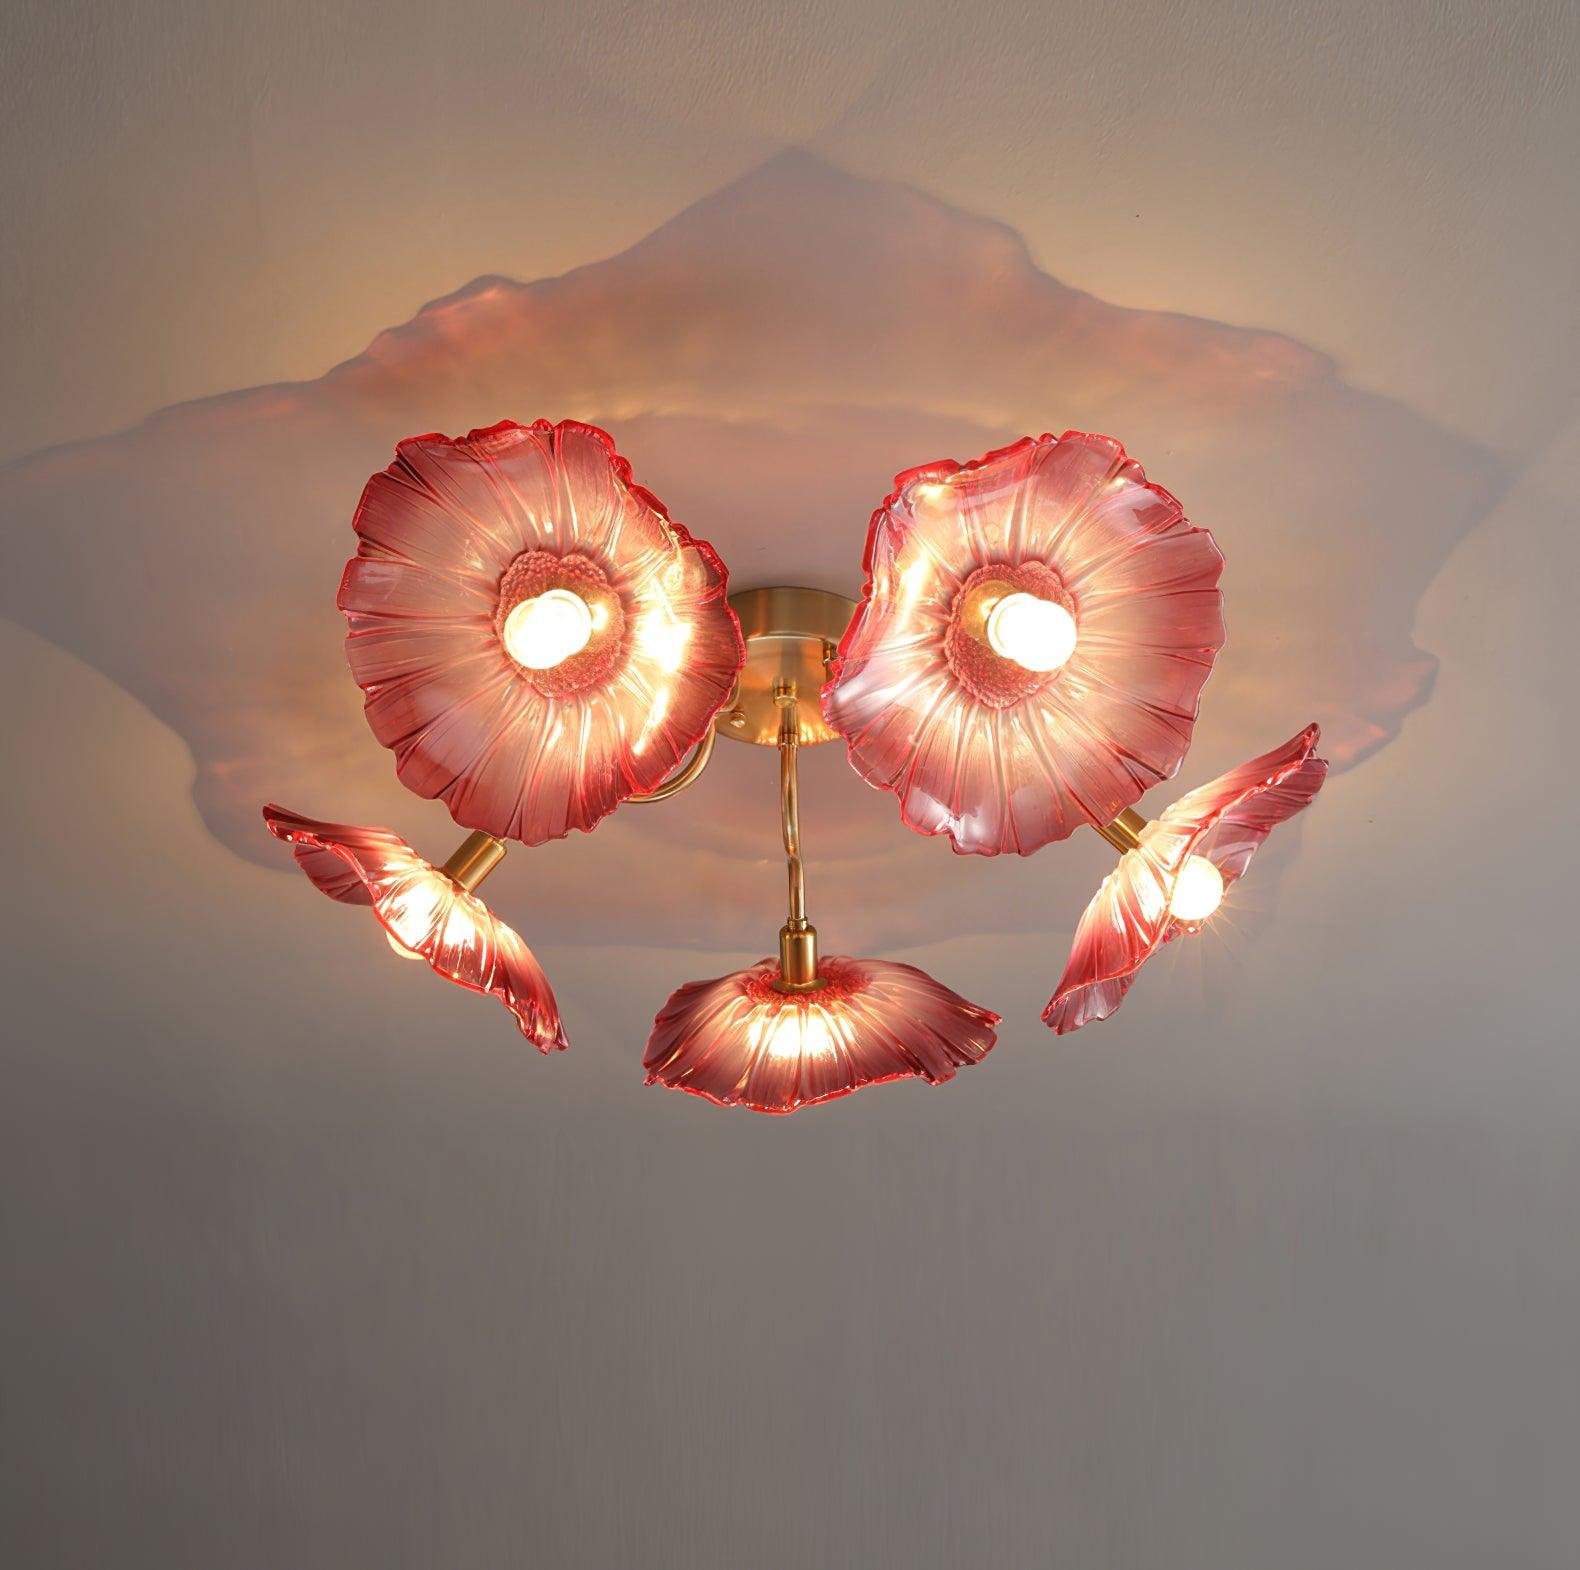 Gold and Pink Lotus Leaf Glass Ceiling Lamp - 5 Pendant Lights, 39.4" Diameter x 10.3" Height (100cm x 26cm)